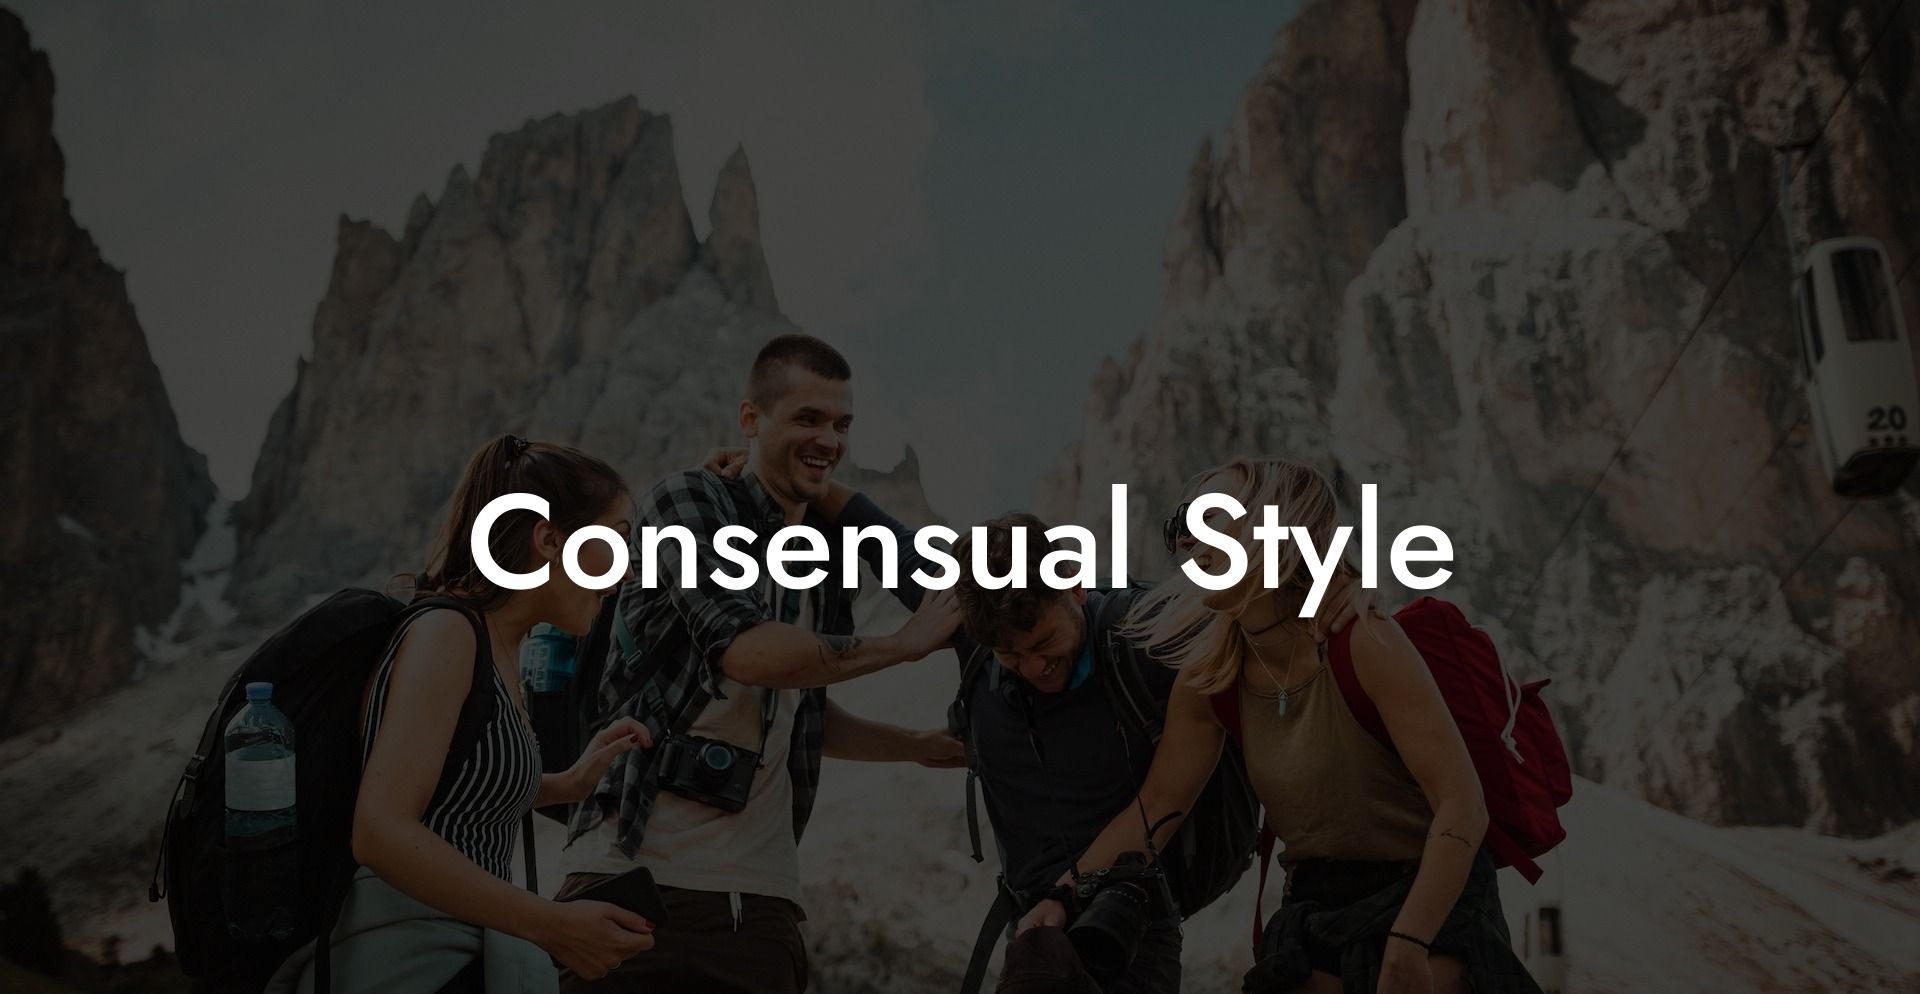 Consensual Style